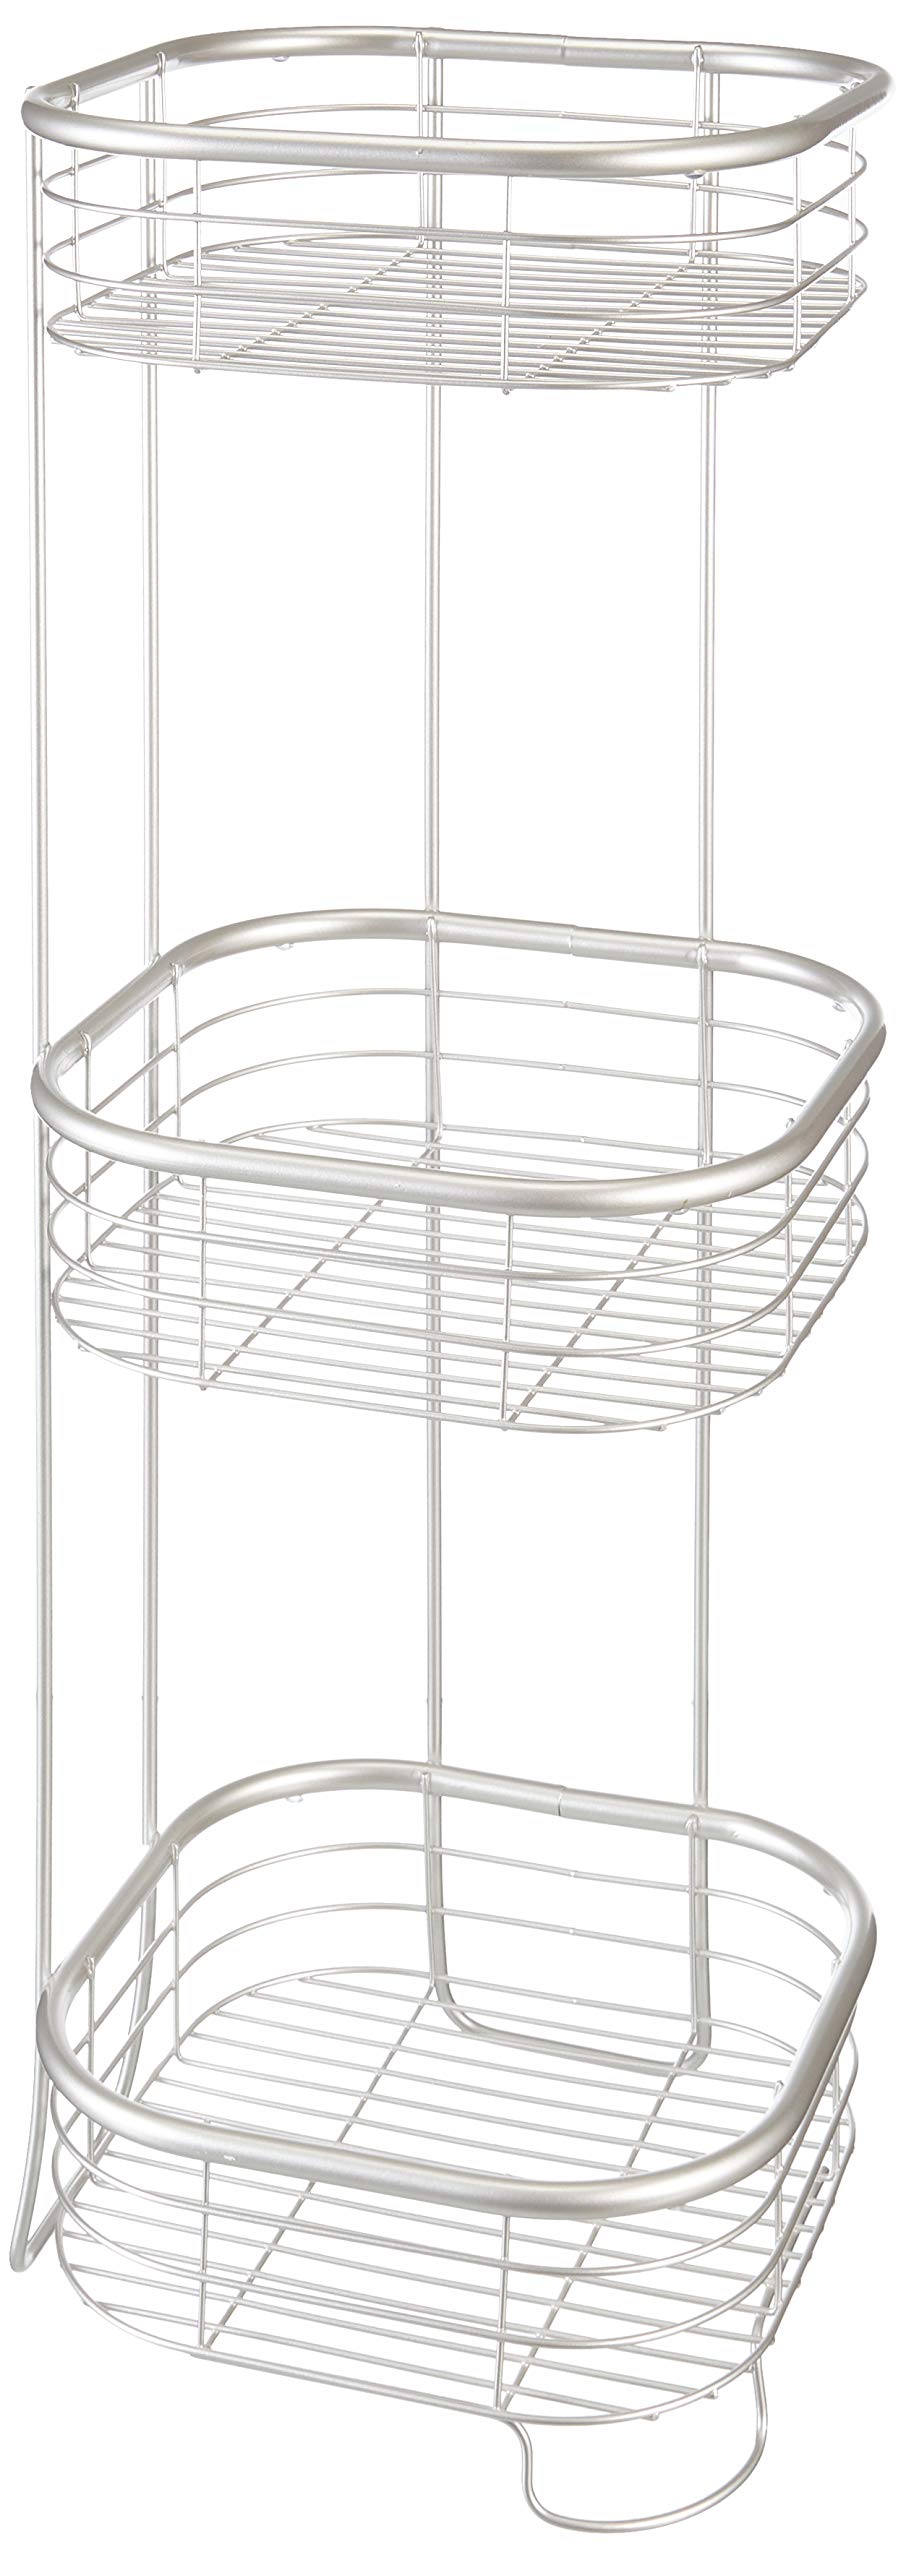 Idesign Standing Shower Caddy Organizer, The Forma Collection - 9.5" X 9.5" X 26.25", Satin Silver